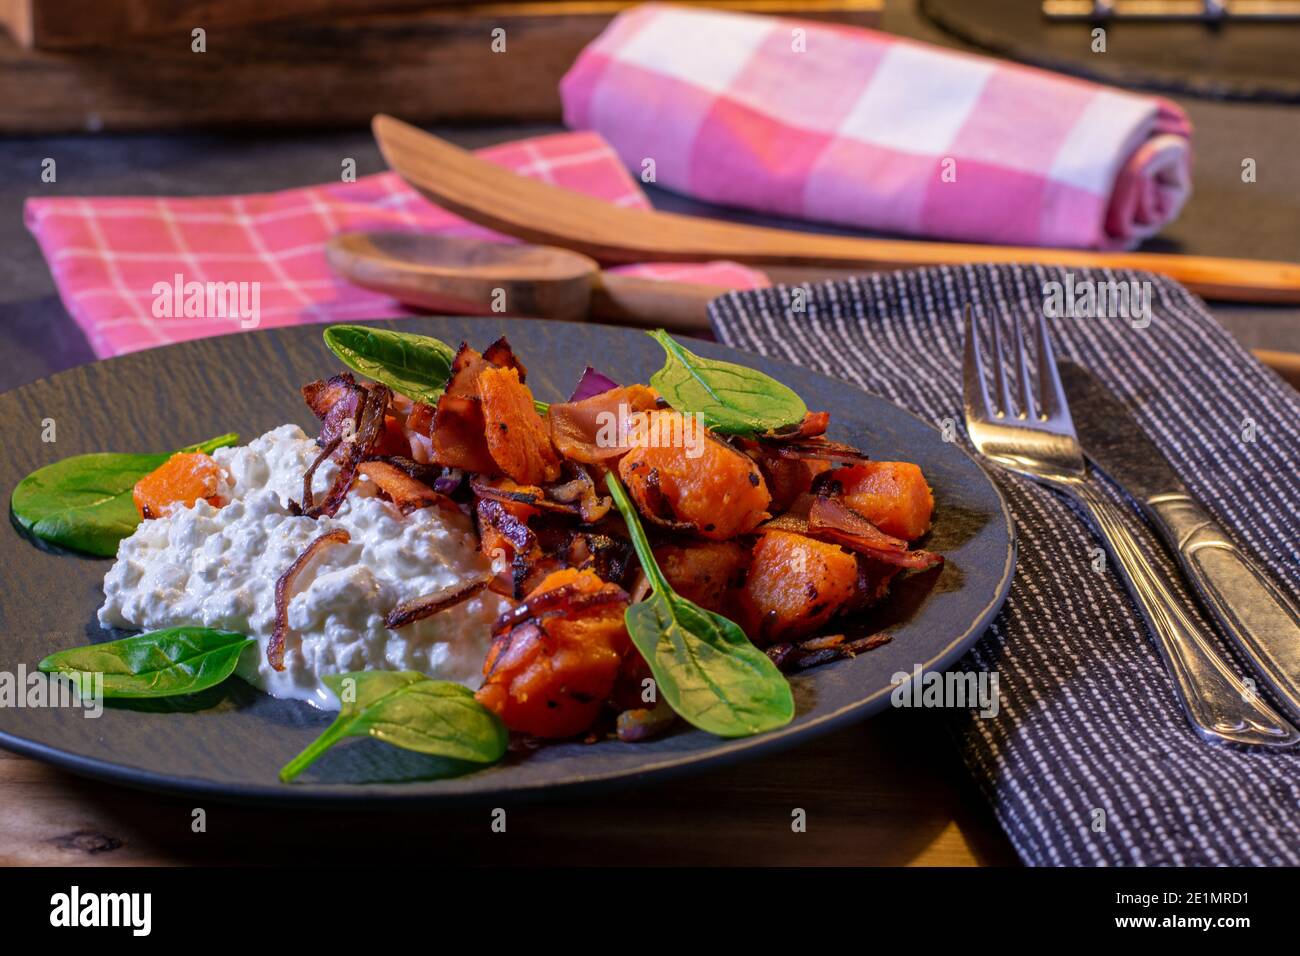 healthy meal with sweet potatoes Stock Photo